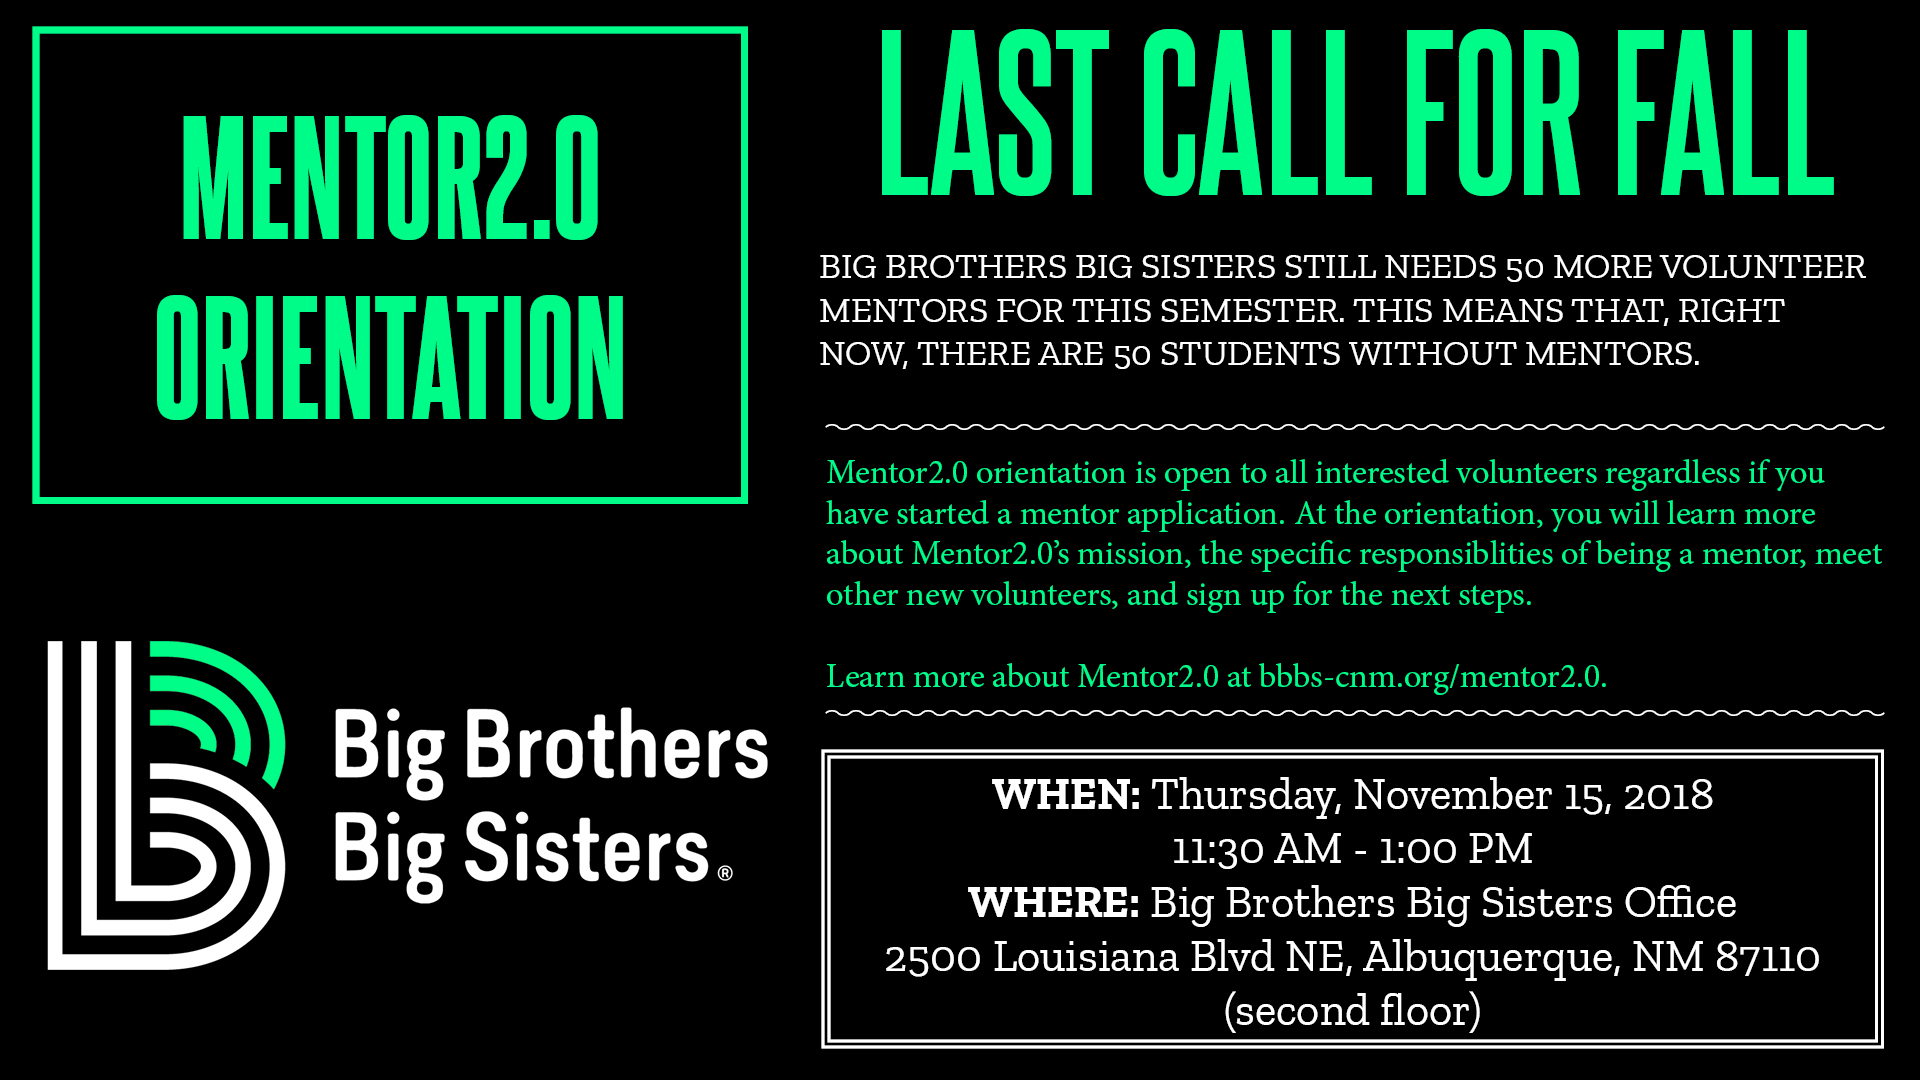 Last Call for Fall - Mentors Needed for Mentor2.0 - Big Brothers Big Sisters of Central New Mexico Youth Mentoring